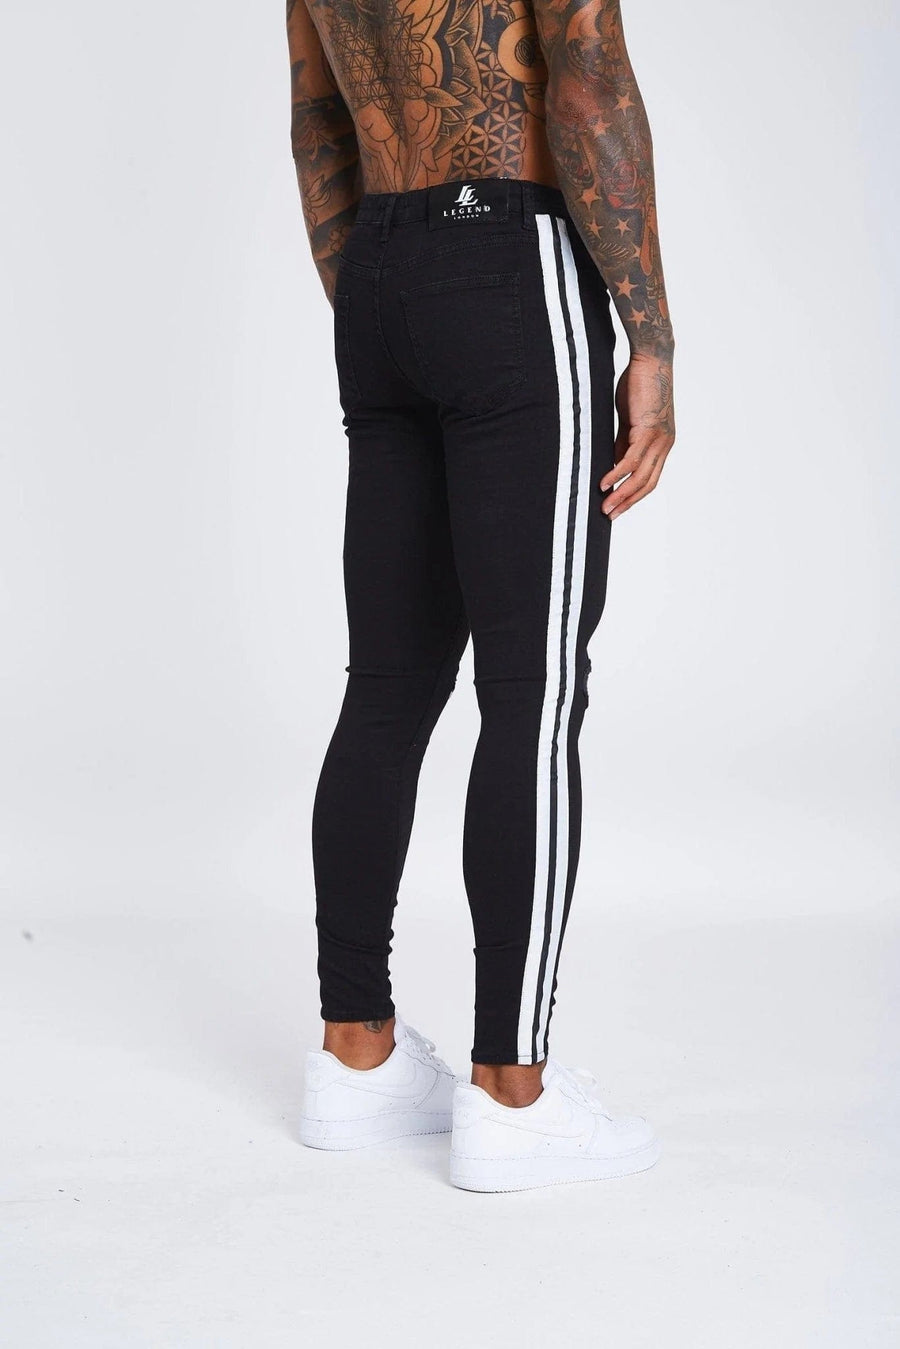 Legend London Jeans SPRAY ON BLACK JEANS WHITE STRIPED - RIPPED KNEE